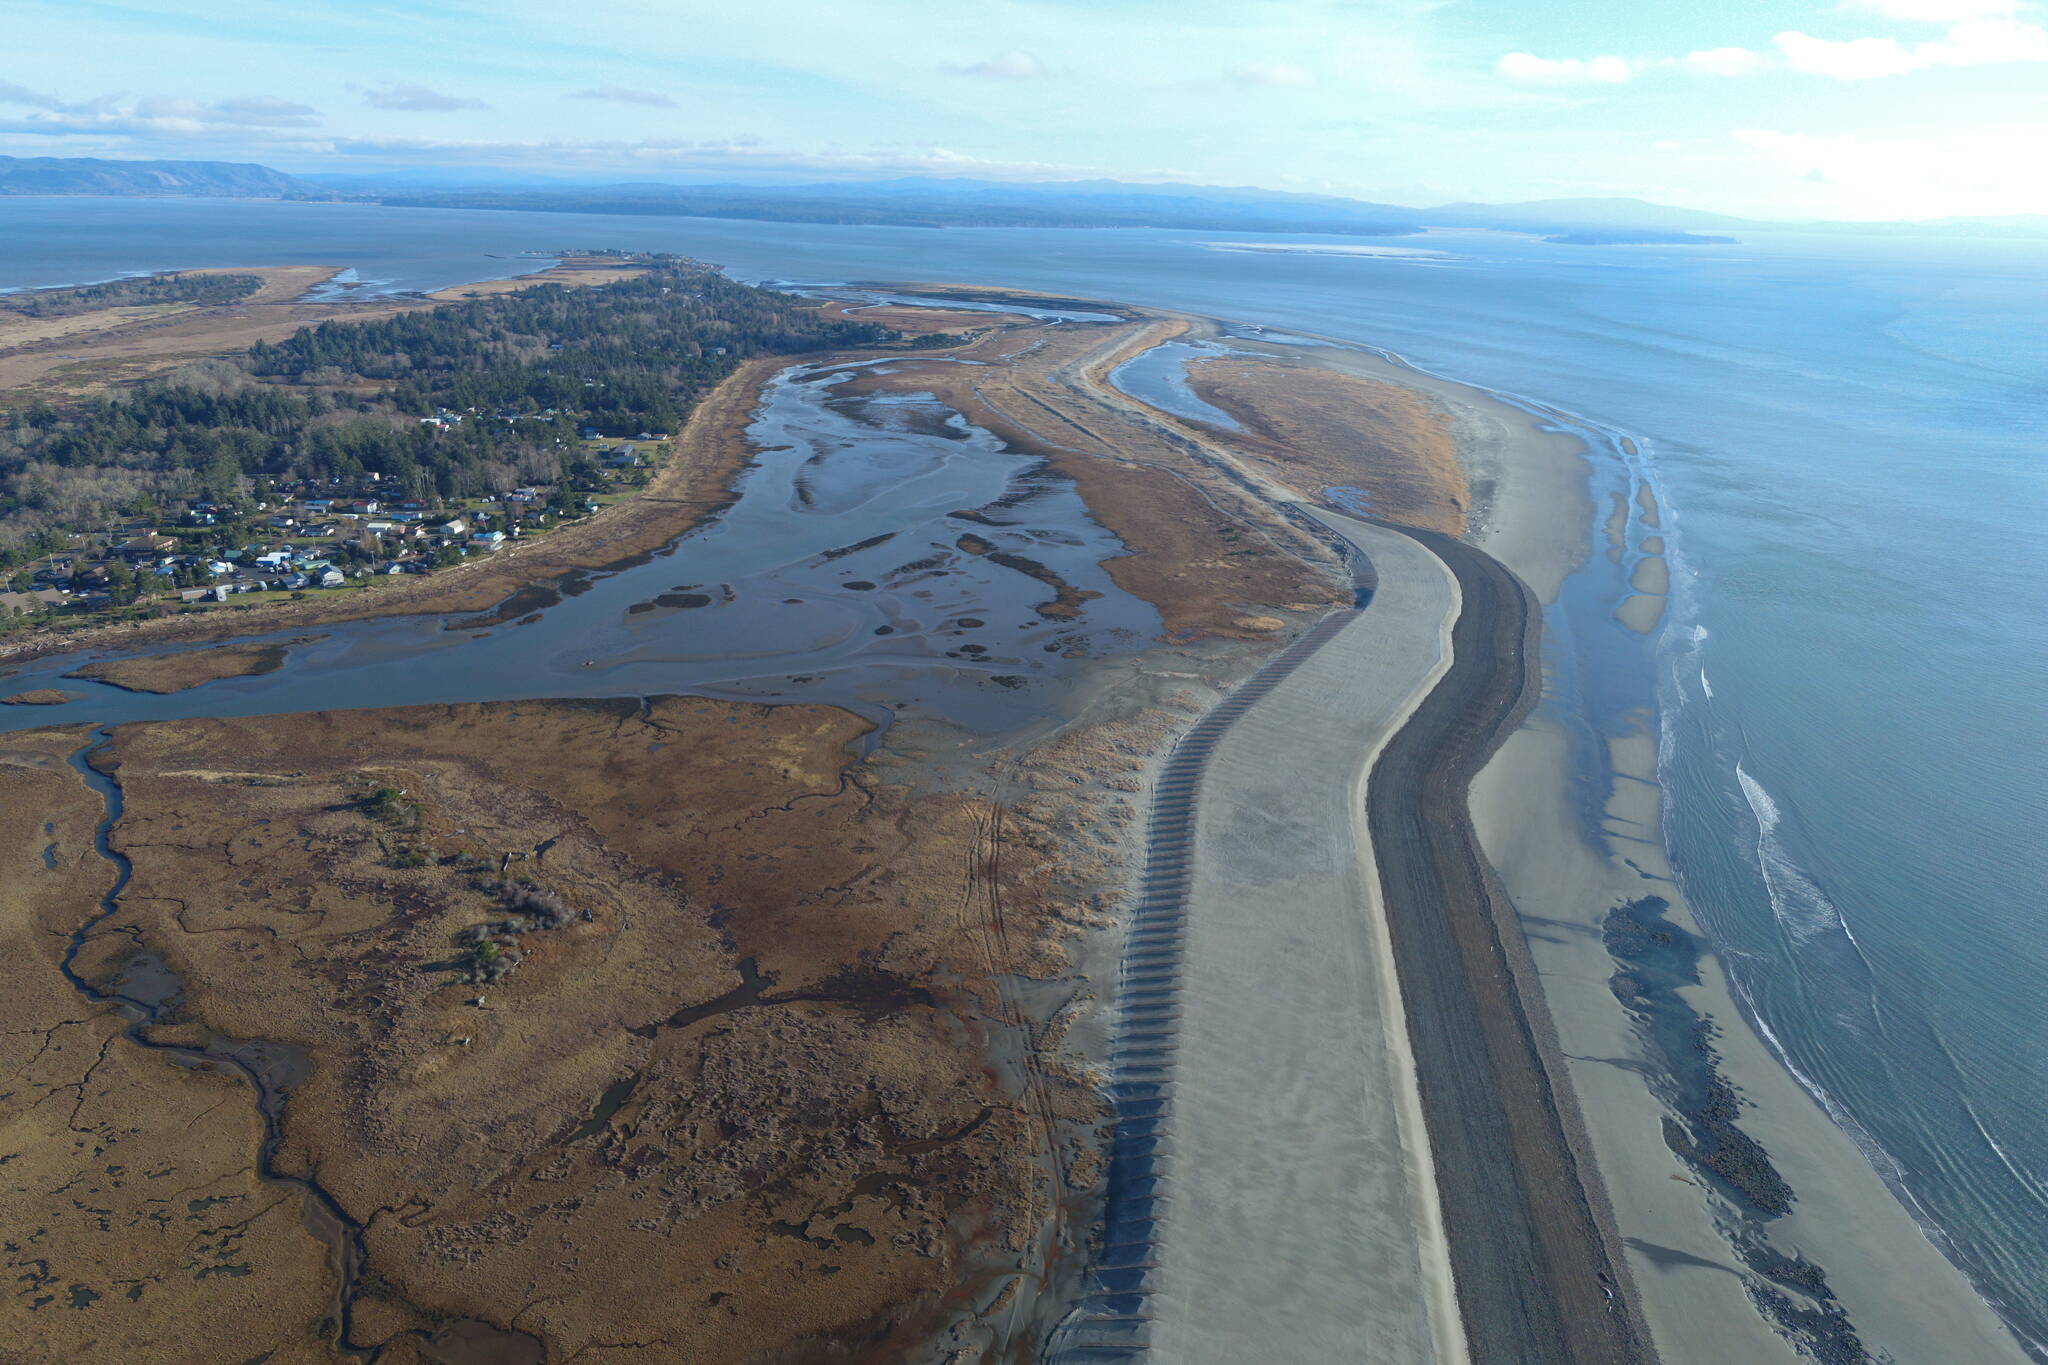 The reinforced storm barrier, the result of an emergency project overseen by the Army Corps of Engineers, will prevent winter storms from thrashing the coastal lowlands of the Shoalwater Bay Indian Tribe’s lands near Tokeland. (Courtesy photo / Shoalwater Bay Indian Tribe)